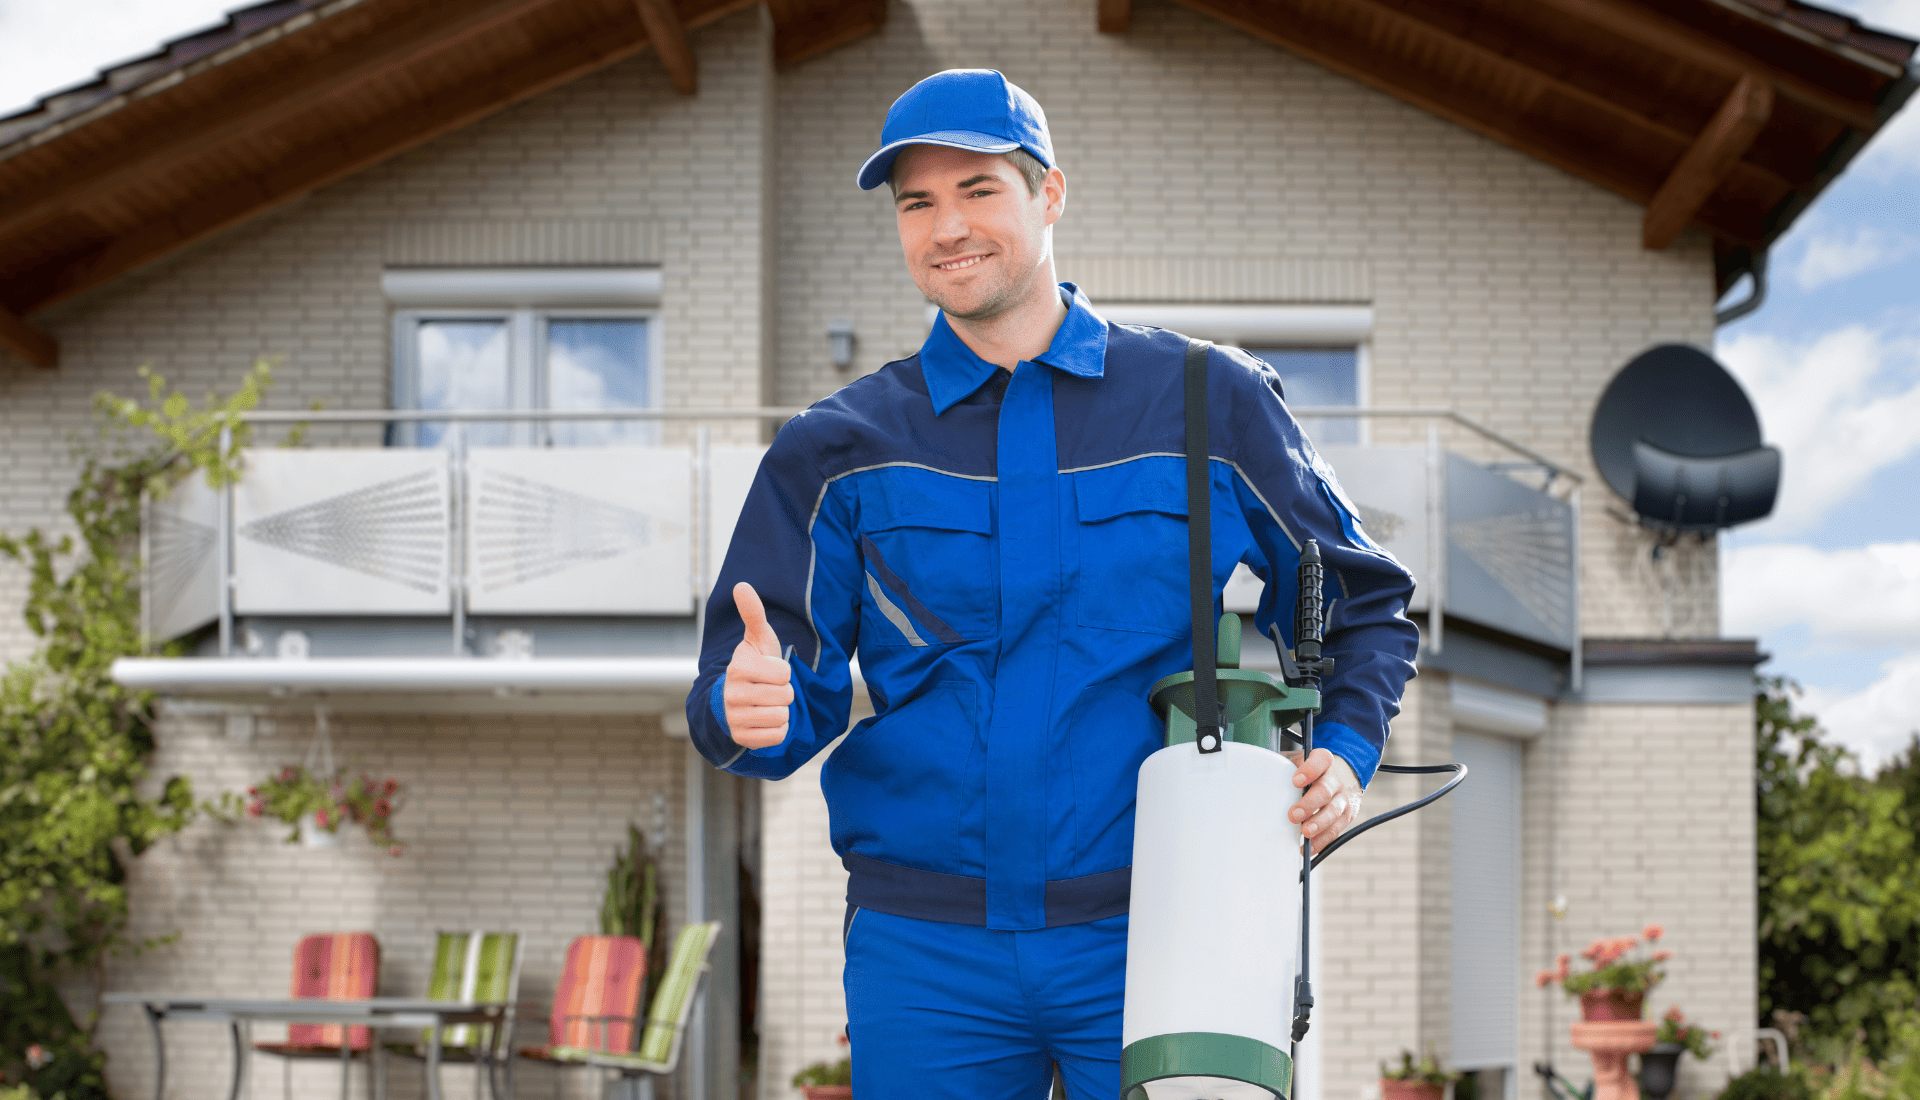 Pest Control Stock Images